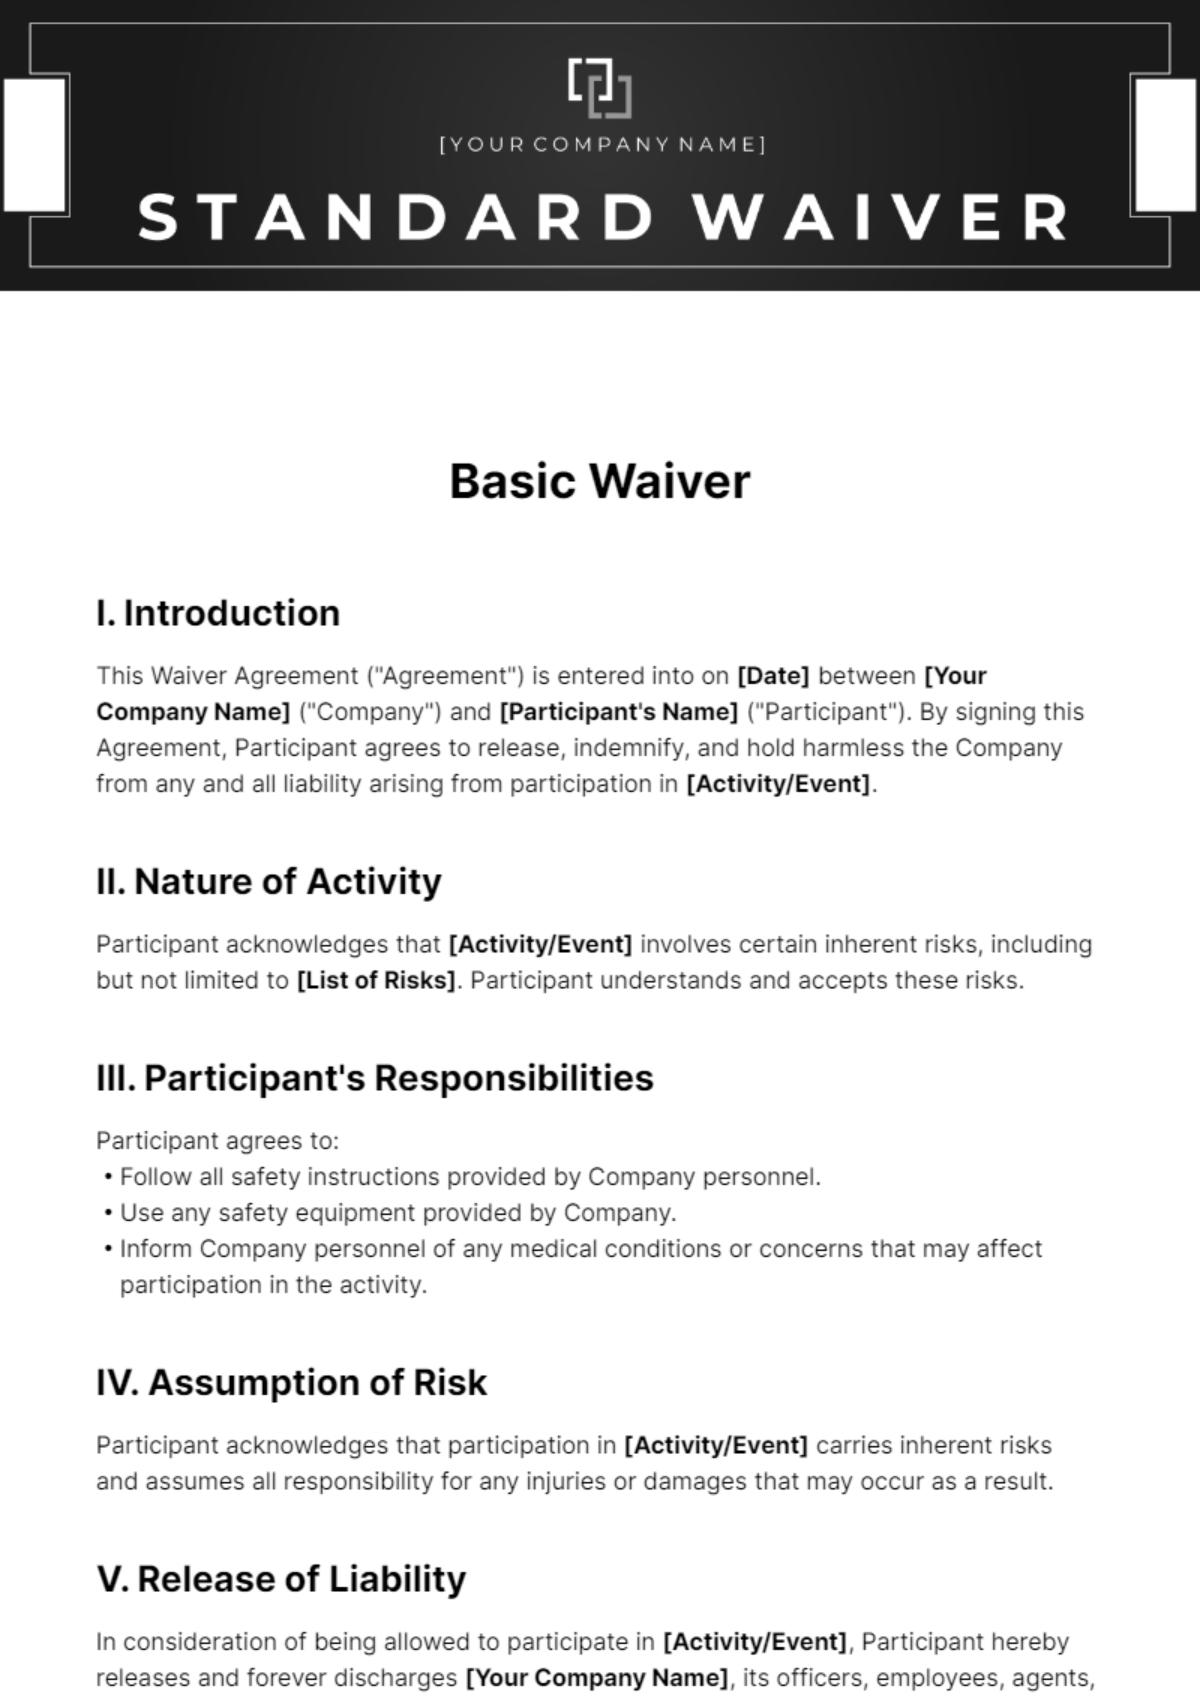 Basic Waiver Template